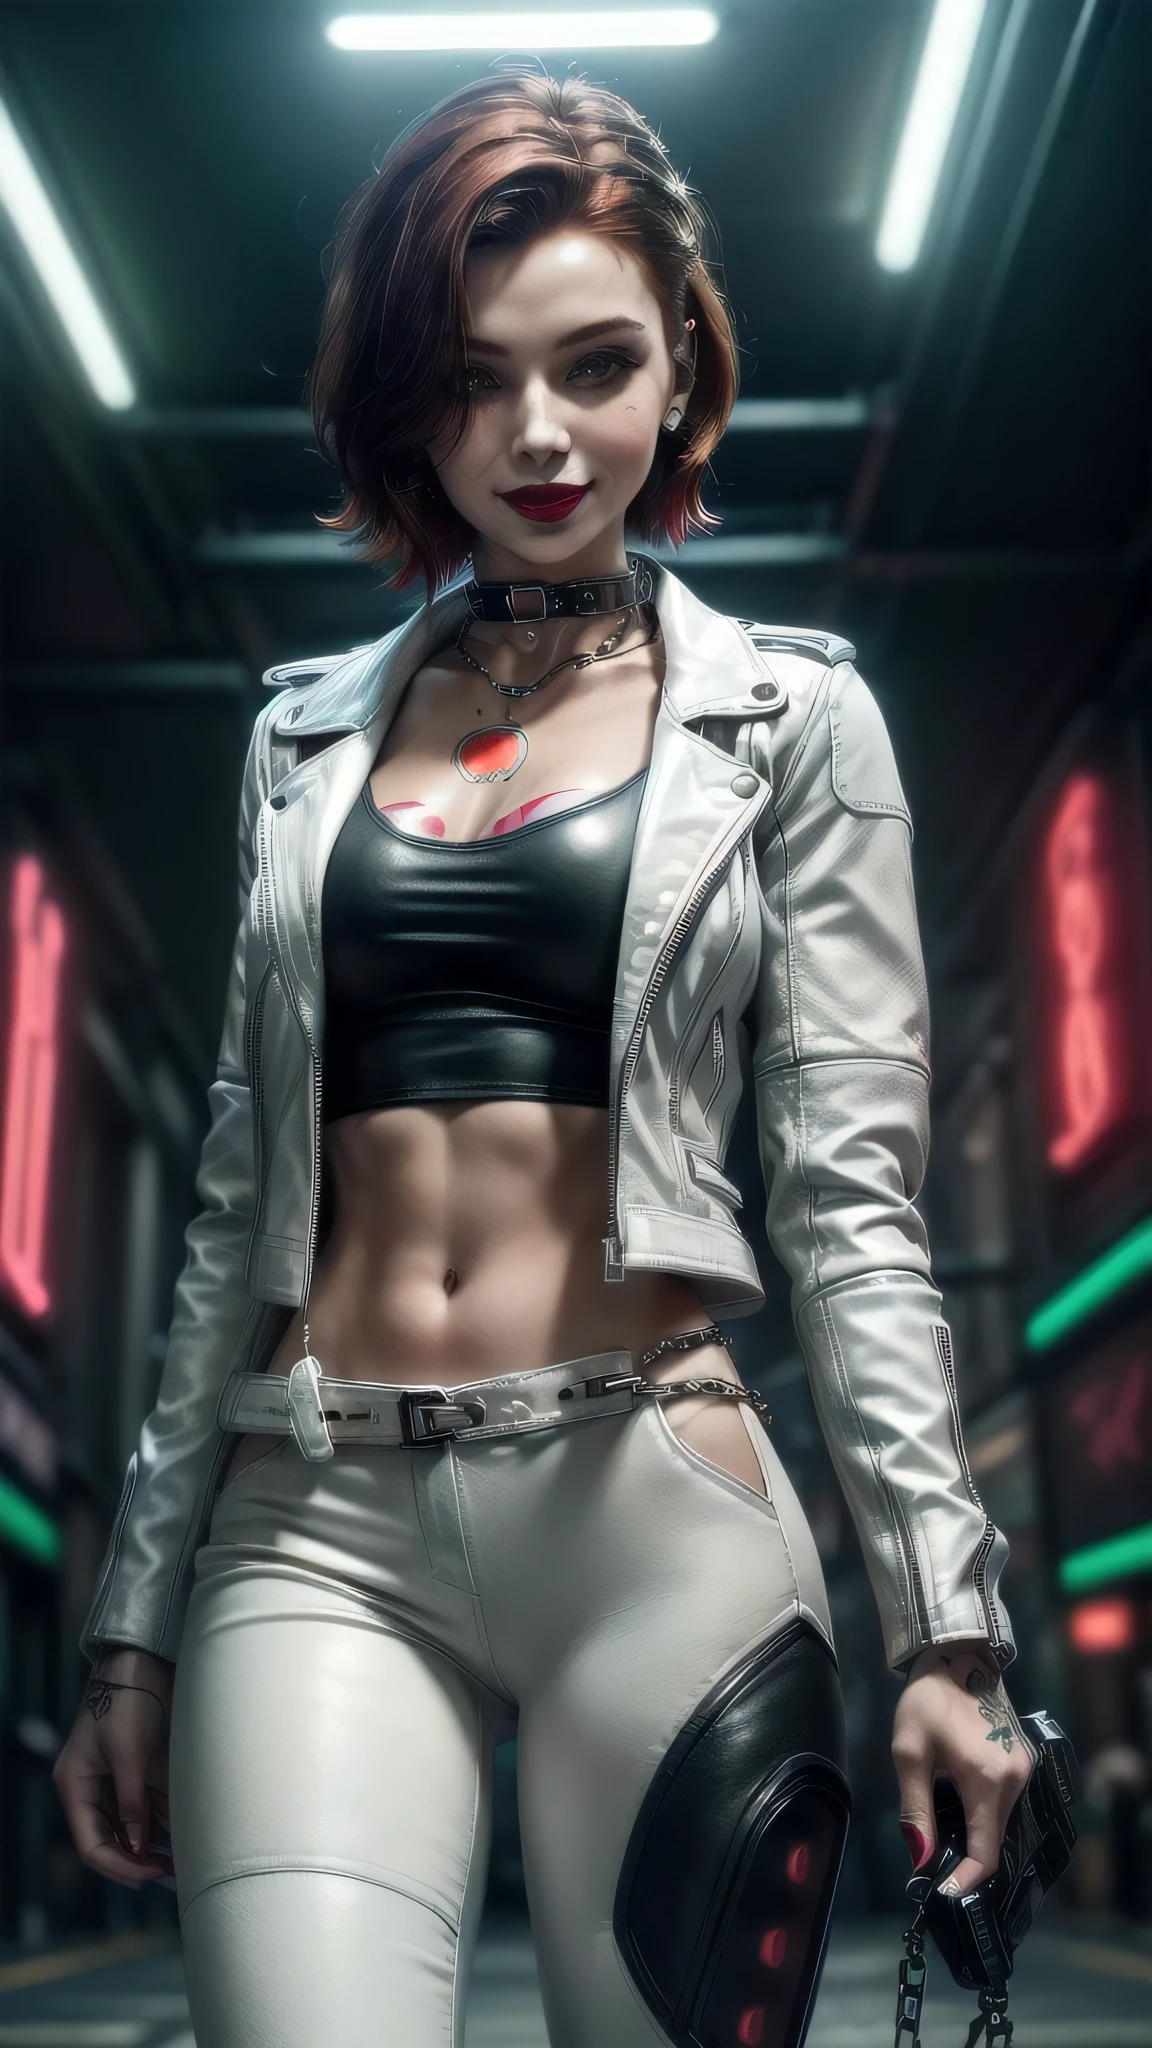 (masterpiece), (extremely intricate:1.3), (realistic), female, 19 years old, ((((([small breasts:large breasts:0.8], short [dark hair:bright ginger hair:0.7], solo, 1girl, smiling red lipstick, (athletic), futuristic cyberpunk street))))), metal reflections, outdoor, intense sunlight, golden hour, professional photograph of a stunning girl detailed, sharp focus, dramatic, award winning, cinematic lighting, volumetrics dtx, (film grain, blurry background, blurry foreground, bokeh, depth of field, interaction), 8K, ((smirking, (green eyes, dark eye makeup))), ((body tattoo: 1.2)), ((fujicolor, god rays)) BREAK; BREAK ((((white leather jacket, collar, chains), leather pants, black t-shirt), hyperrealistic, absurdres))